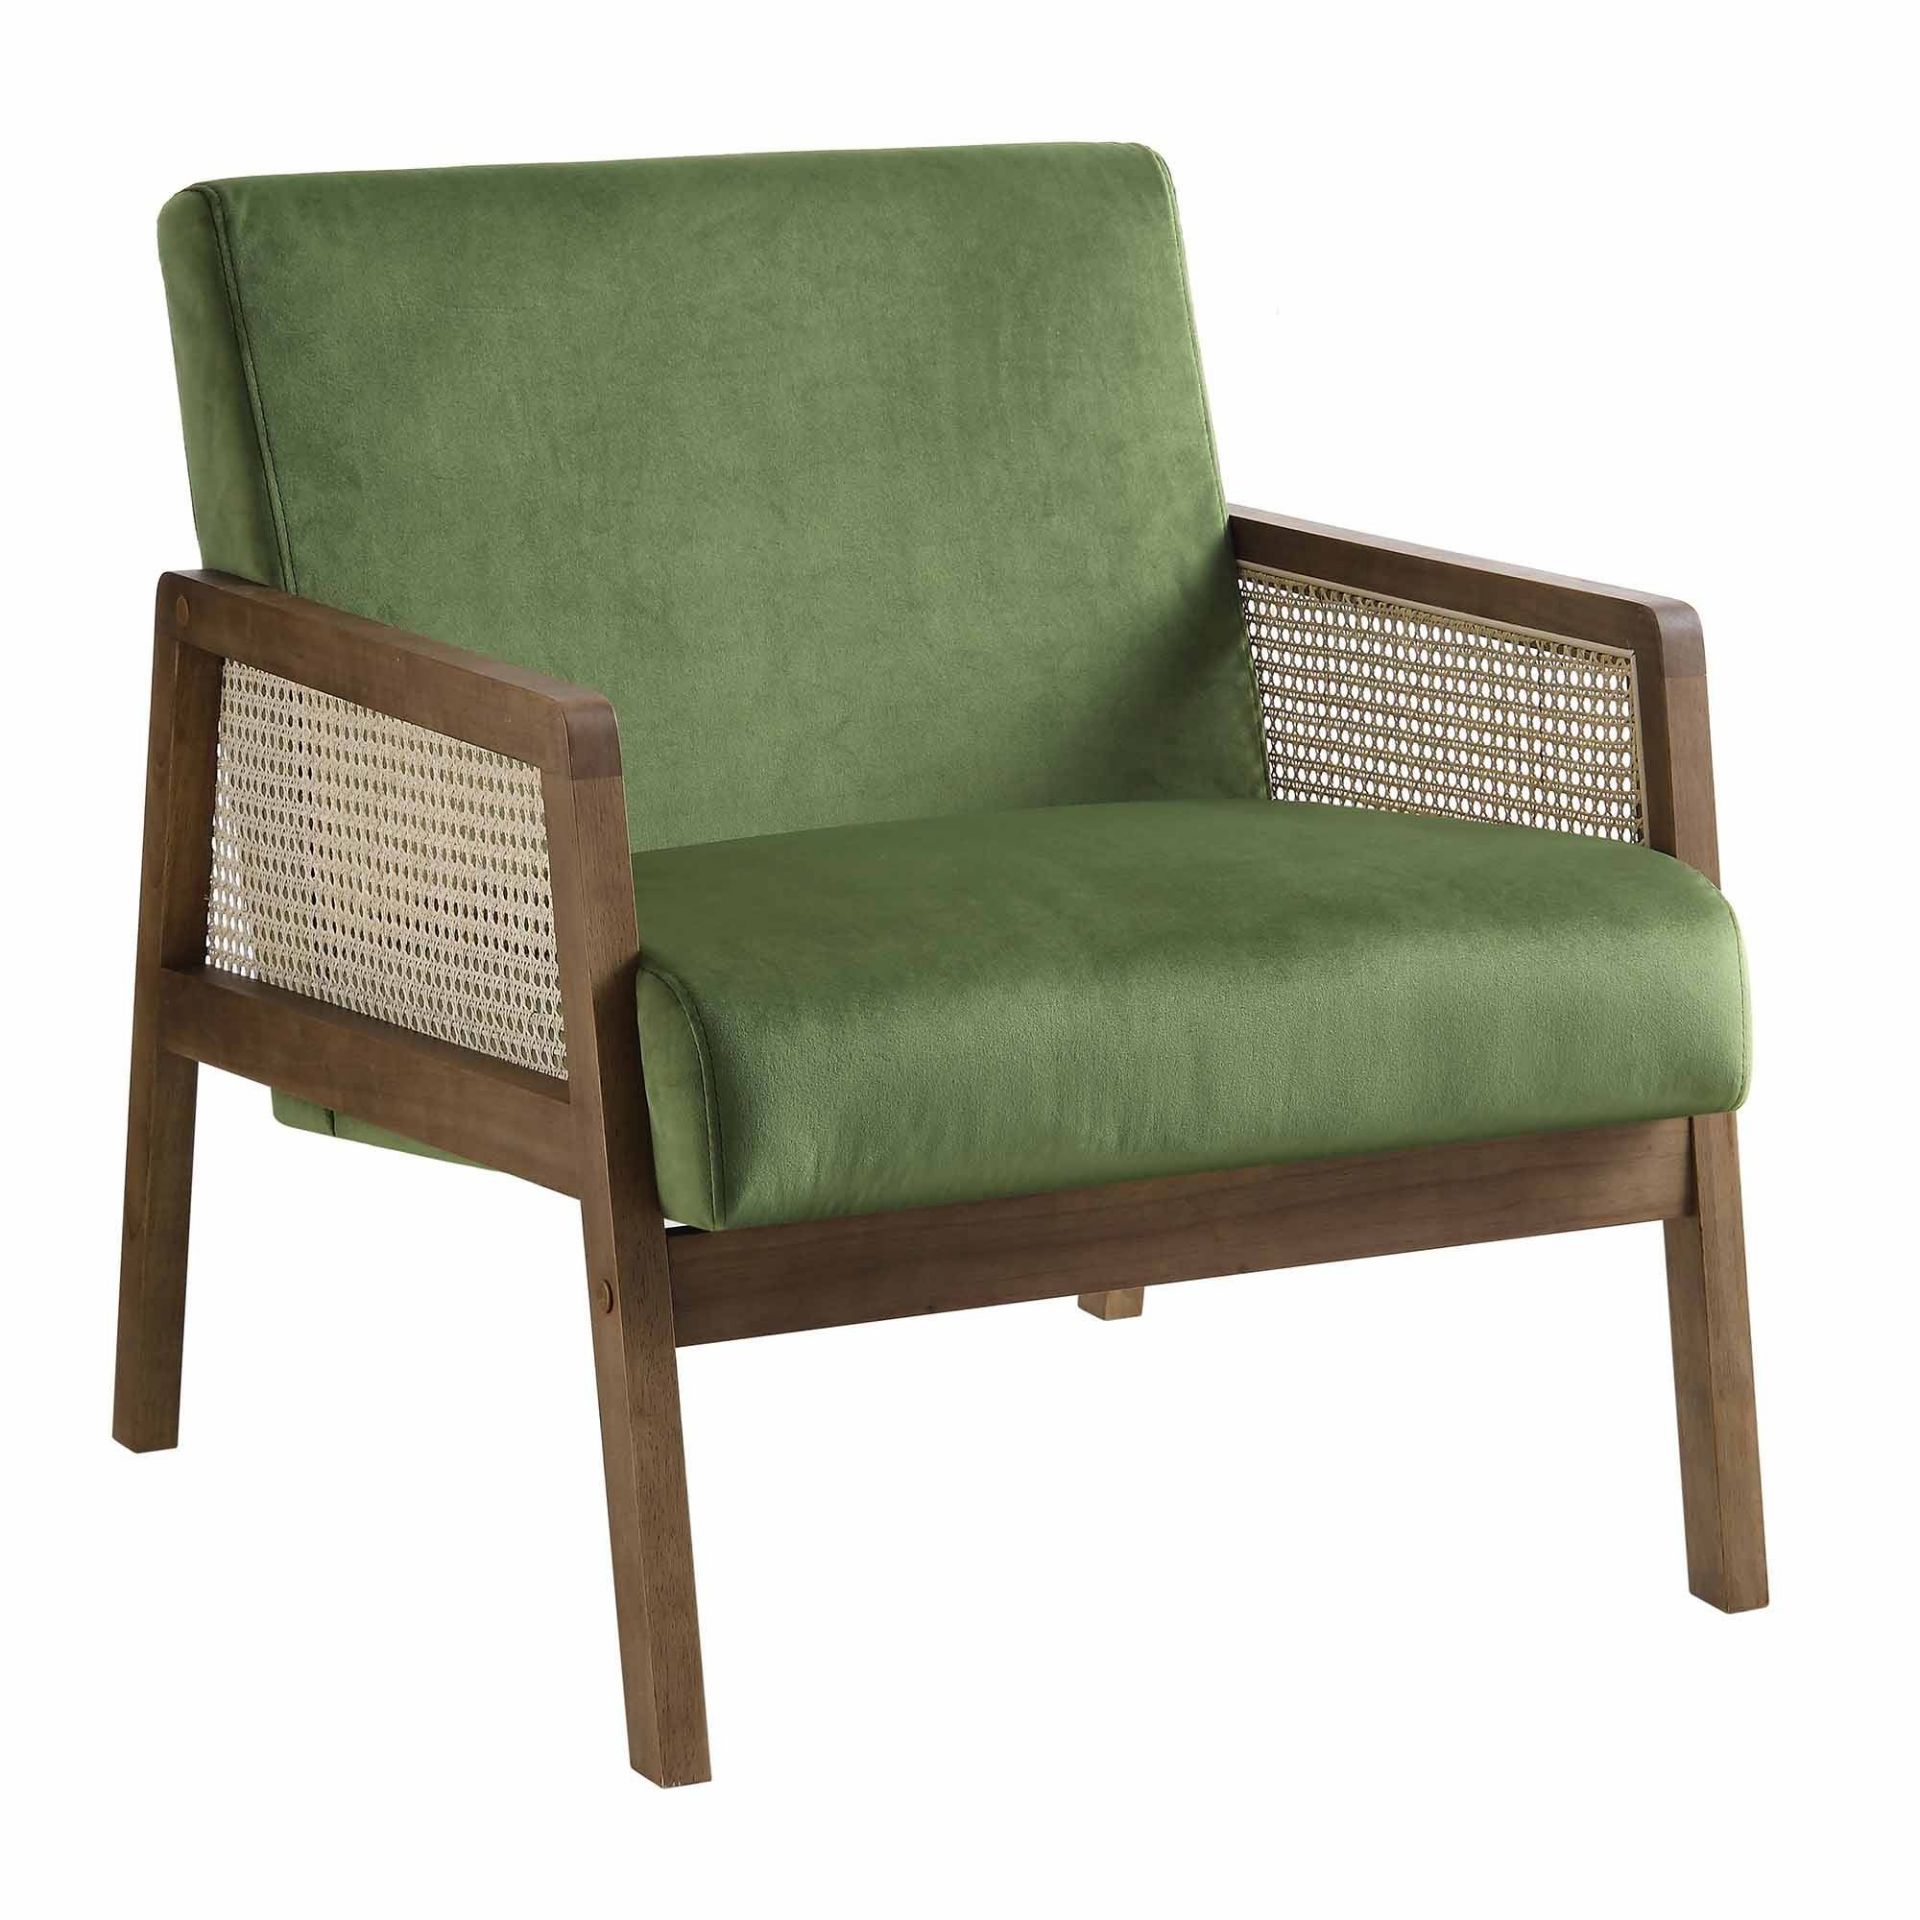 Fyne Moss Green Velvet Walnut Frame Rattan Armchair. - ER30. RRP £229.99. Crafted from solid wood, - Image 2 of 2